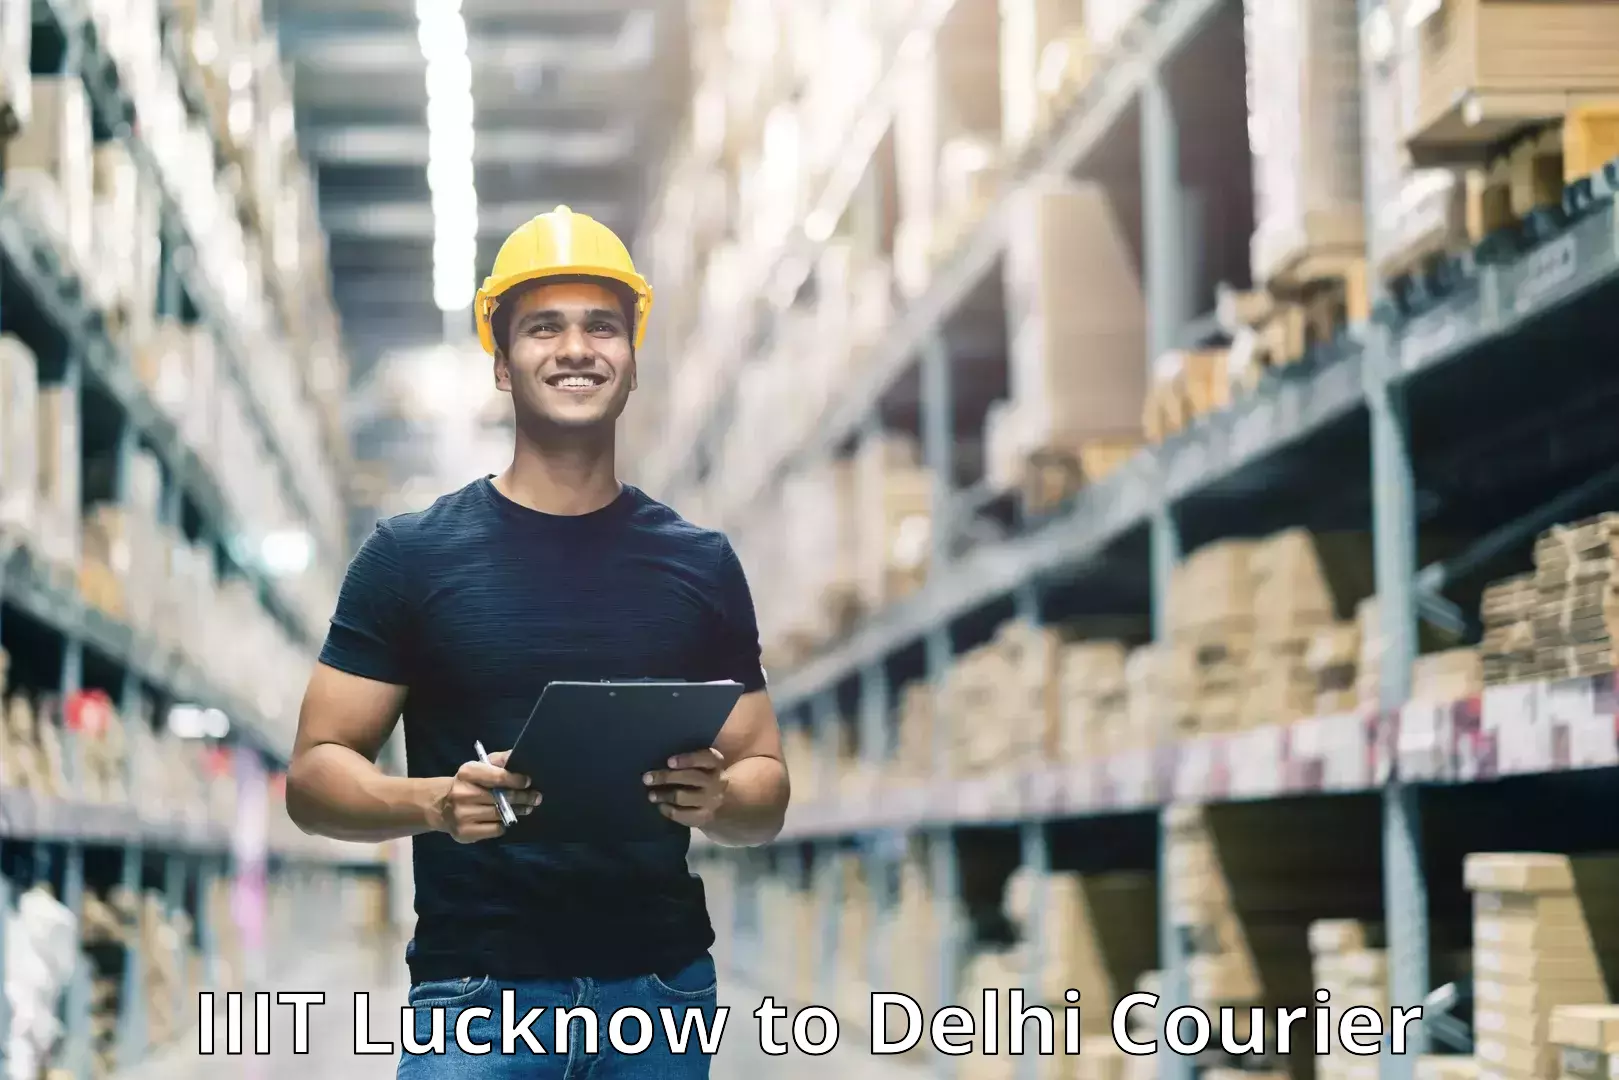 Advanced shipping network IIIT Lucknow to Delhi